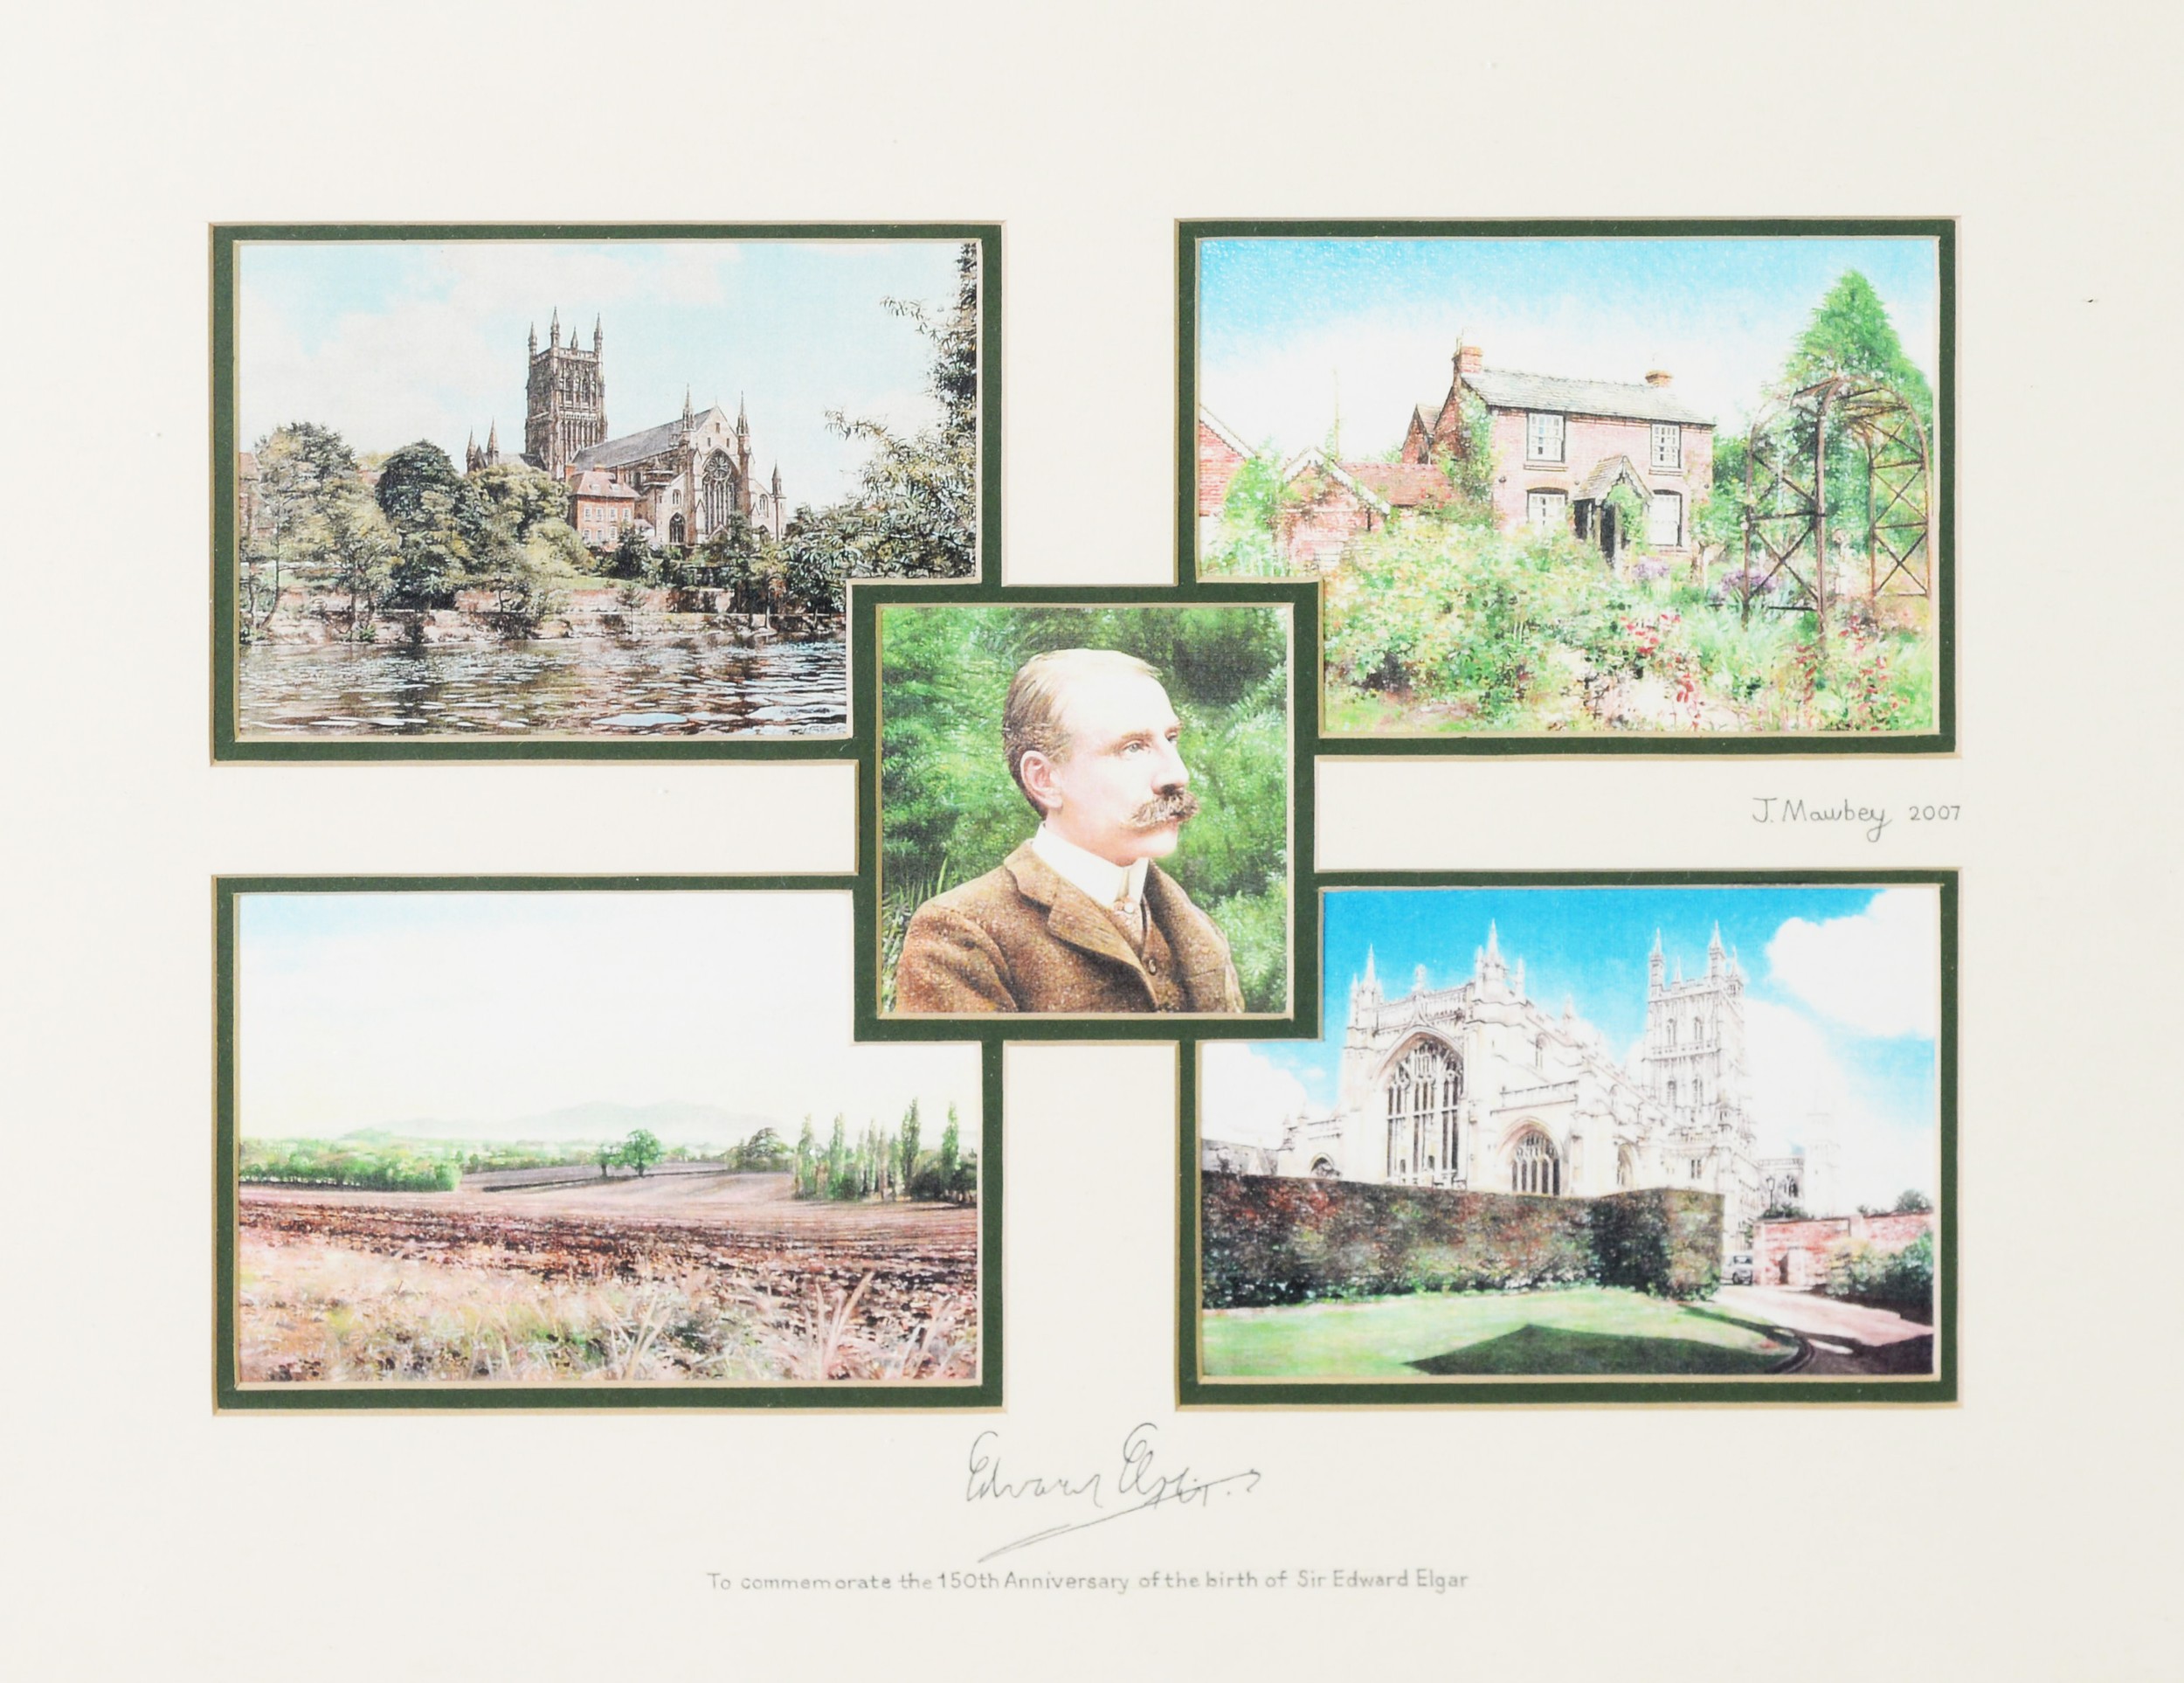 NORMAN PERRYMAN LIMITED EDITION LITHOGRAPH Published by the Elgar Birthplace Appeal, from a - Image 4 of 6